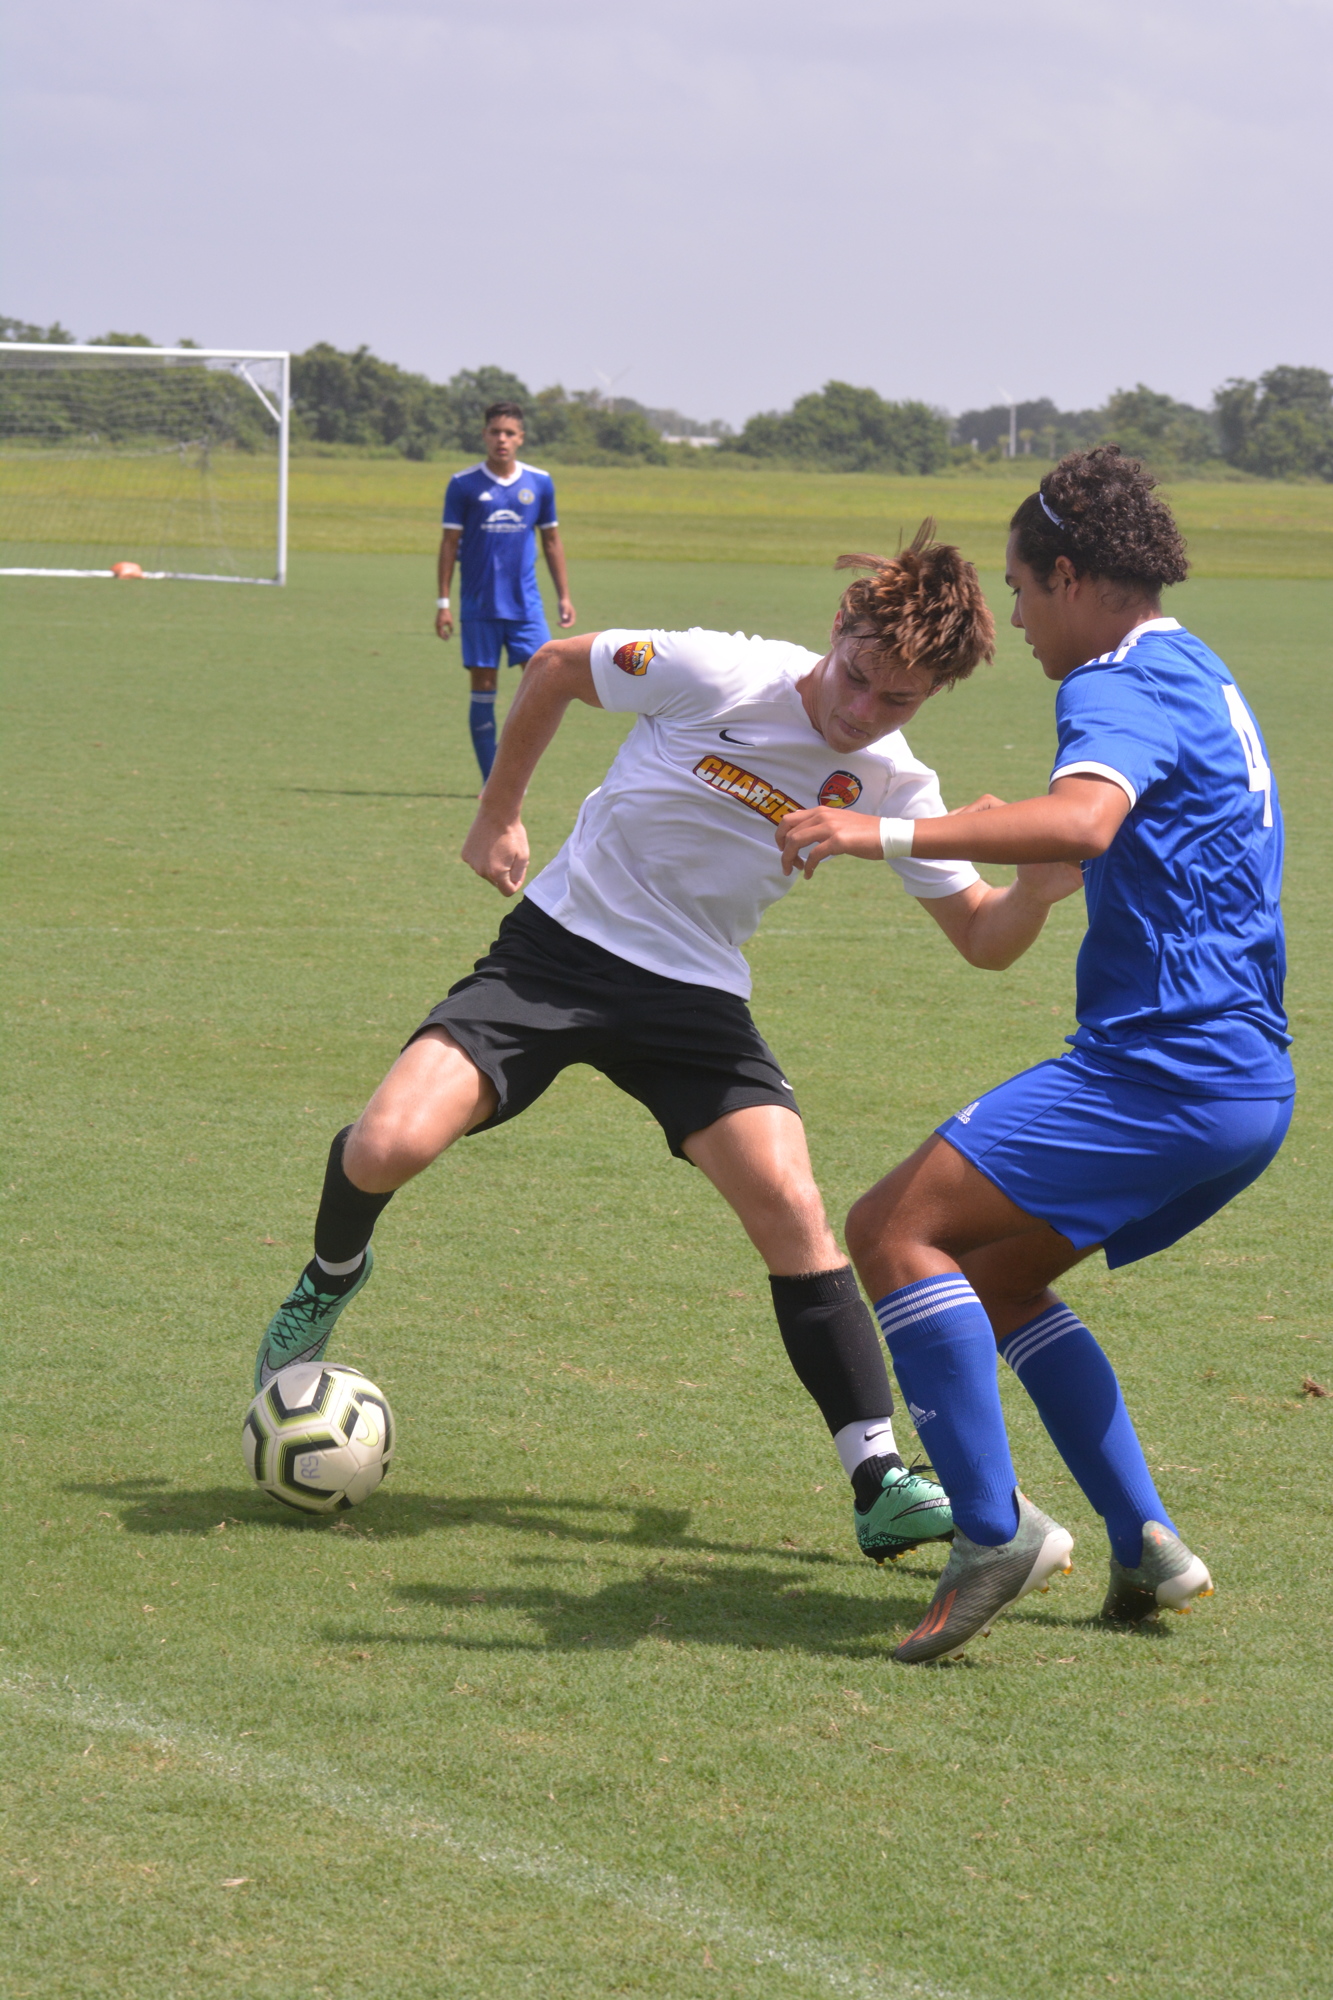 Boys U19 Clearwater Chargers midfielder Jack Righter  defends the ball during a match against Hunter's Creek SC (Orlando). Photo by Ryan Kohn.